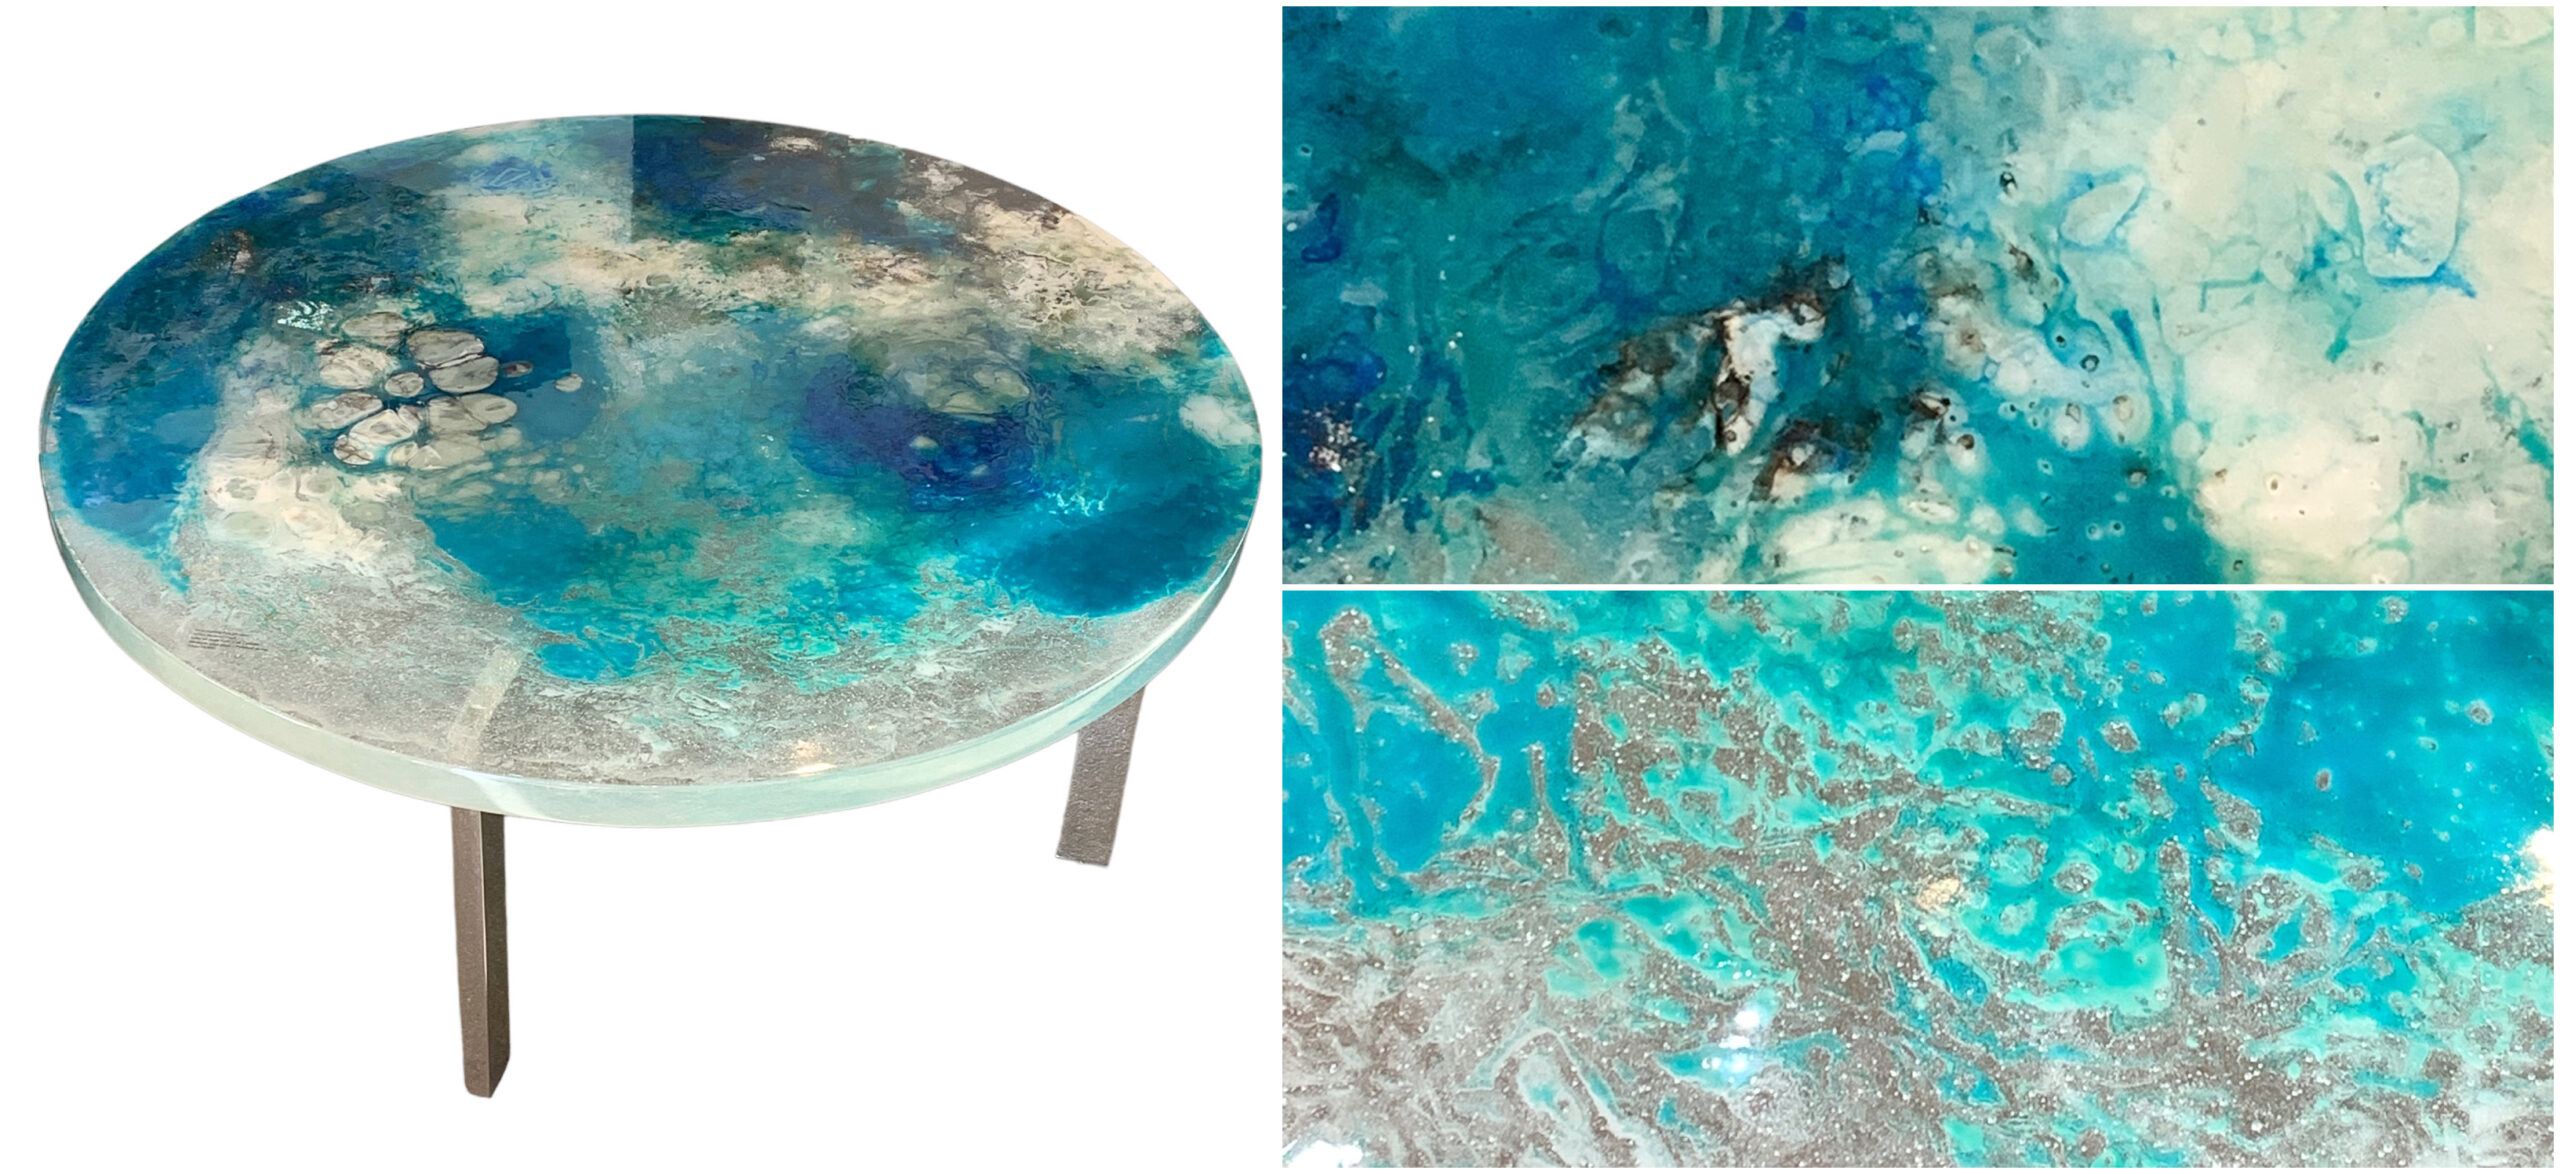 Round teal, blue, white, black, and clear cast glass coffee table by Heather Cuell at Effusion Art Gallery in Invermere BC